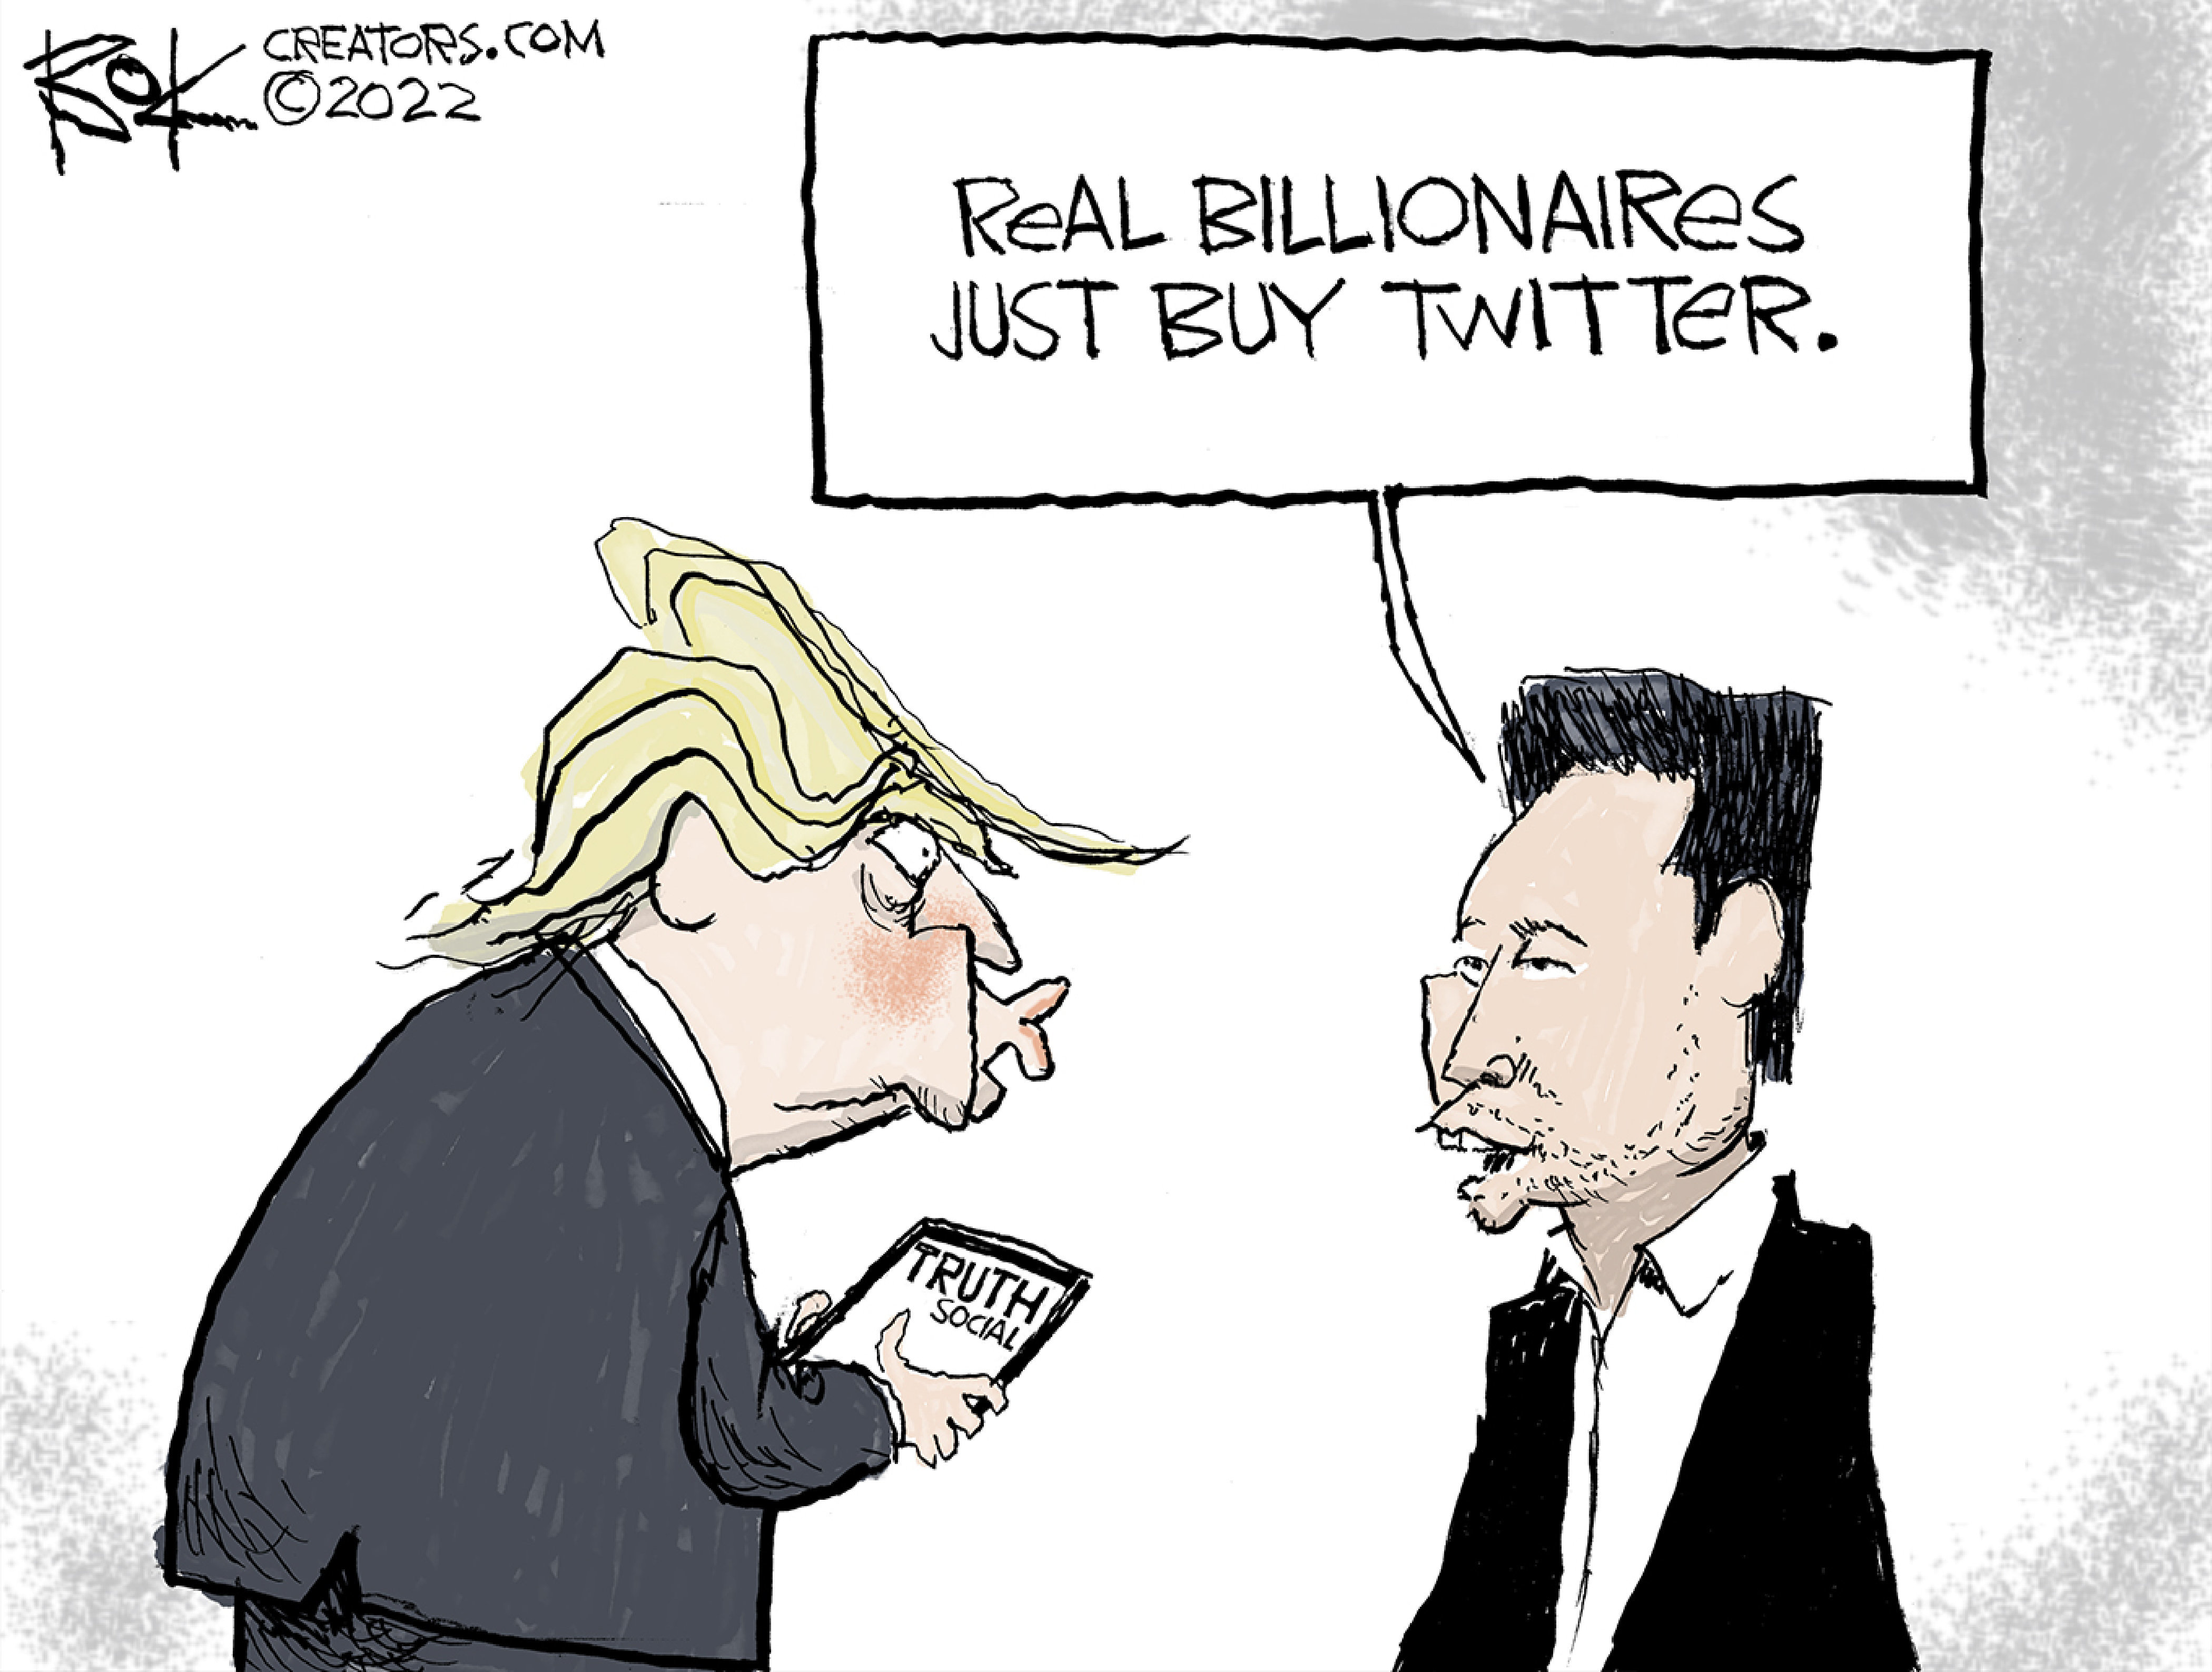 5 scathingly funny cartoons about Elon Musk's Twitter bid | The Week